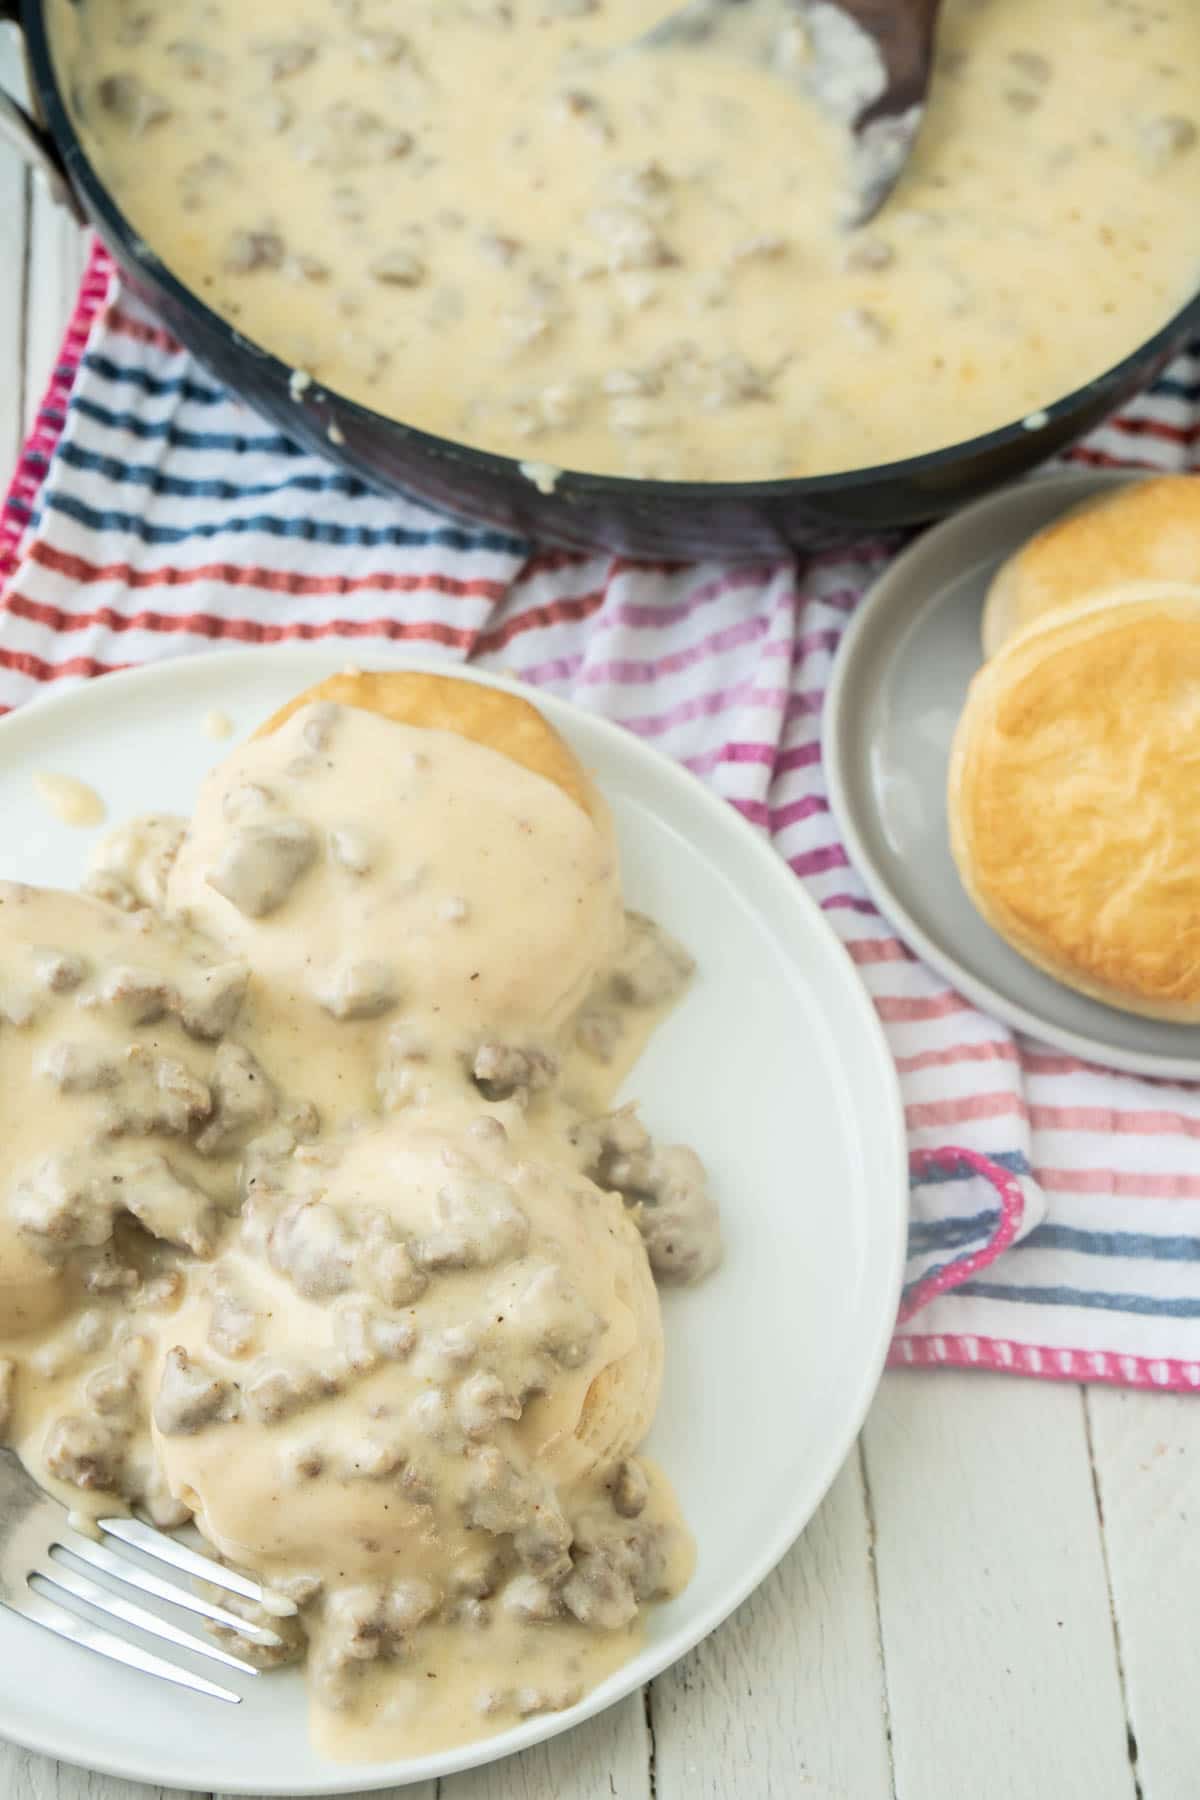 Biscuits and sausage gravy on a white plate